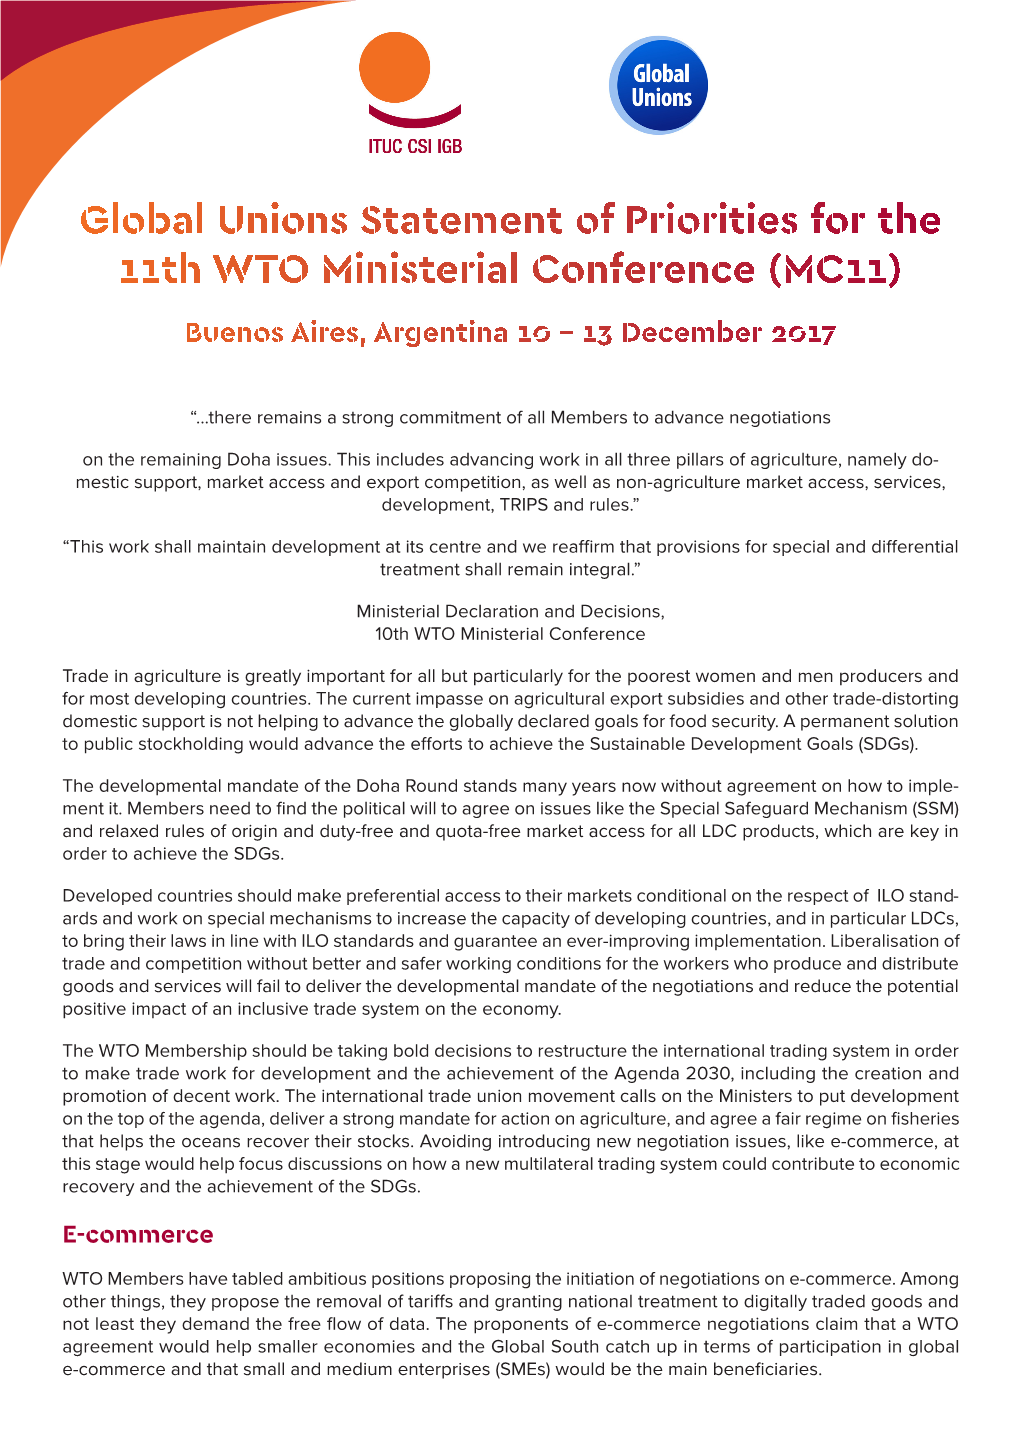 Global Unions Statement of Priorities for the 11Th WTO Ministerial Conference (MC11) Buenos Aires, Argentina 10 - 13 December 2017